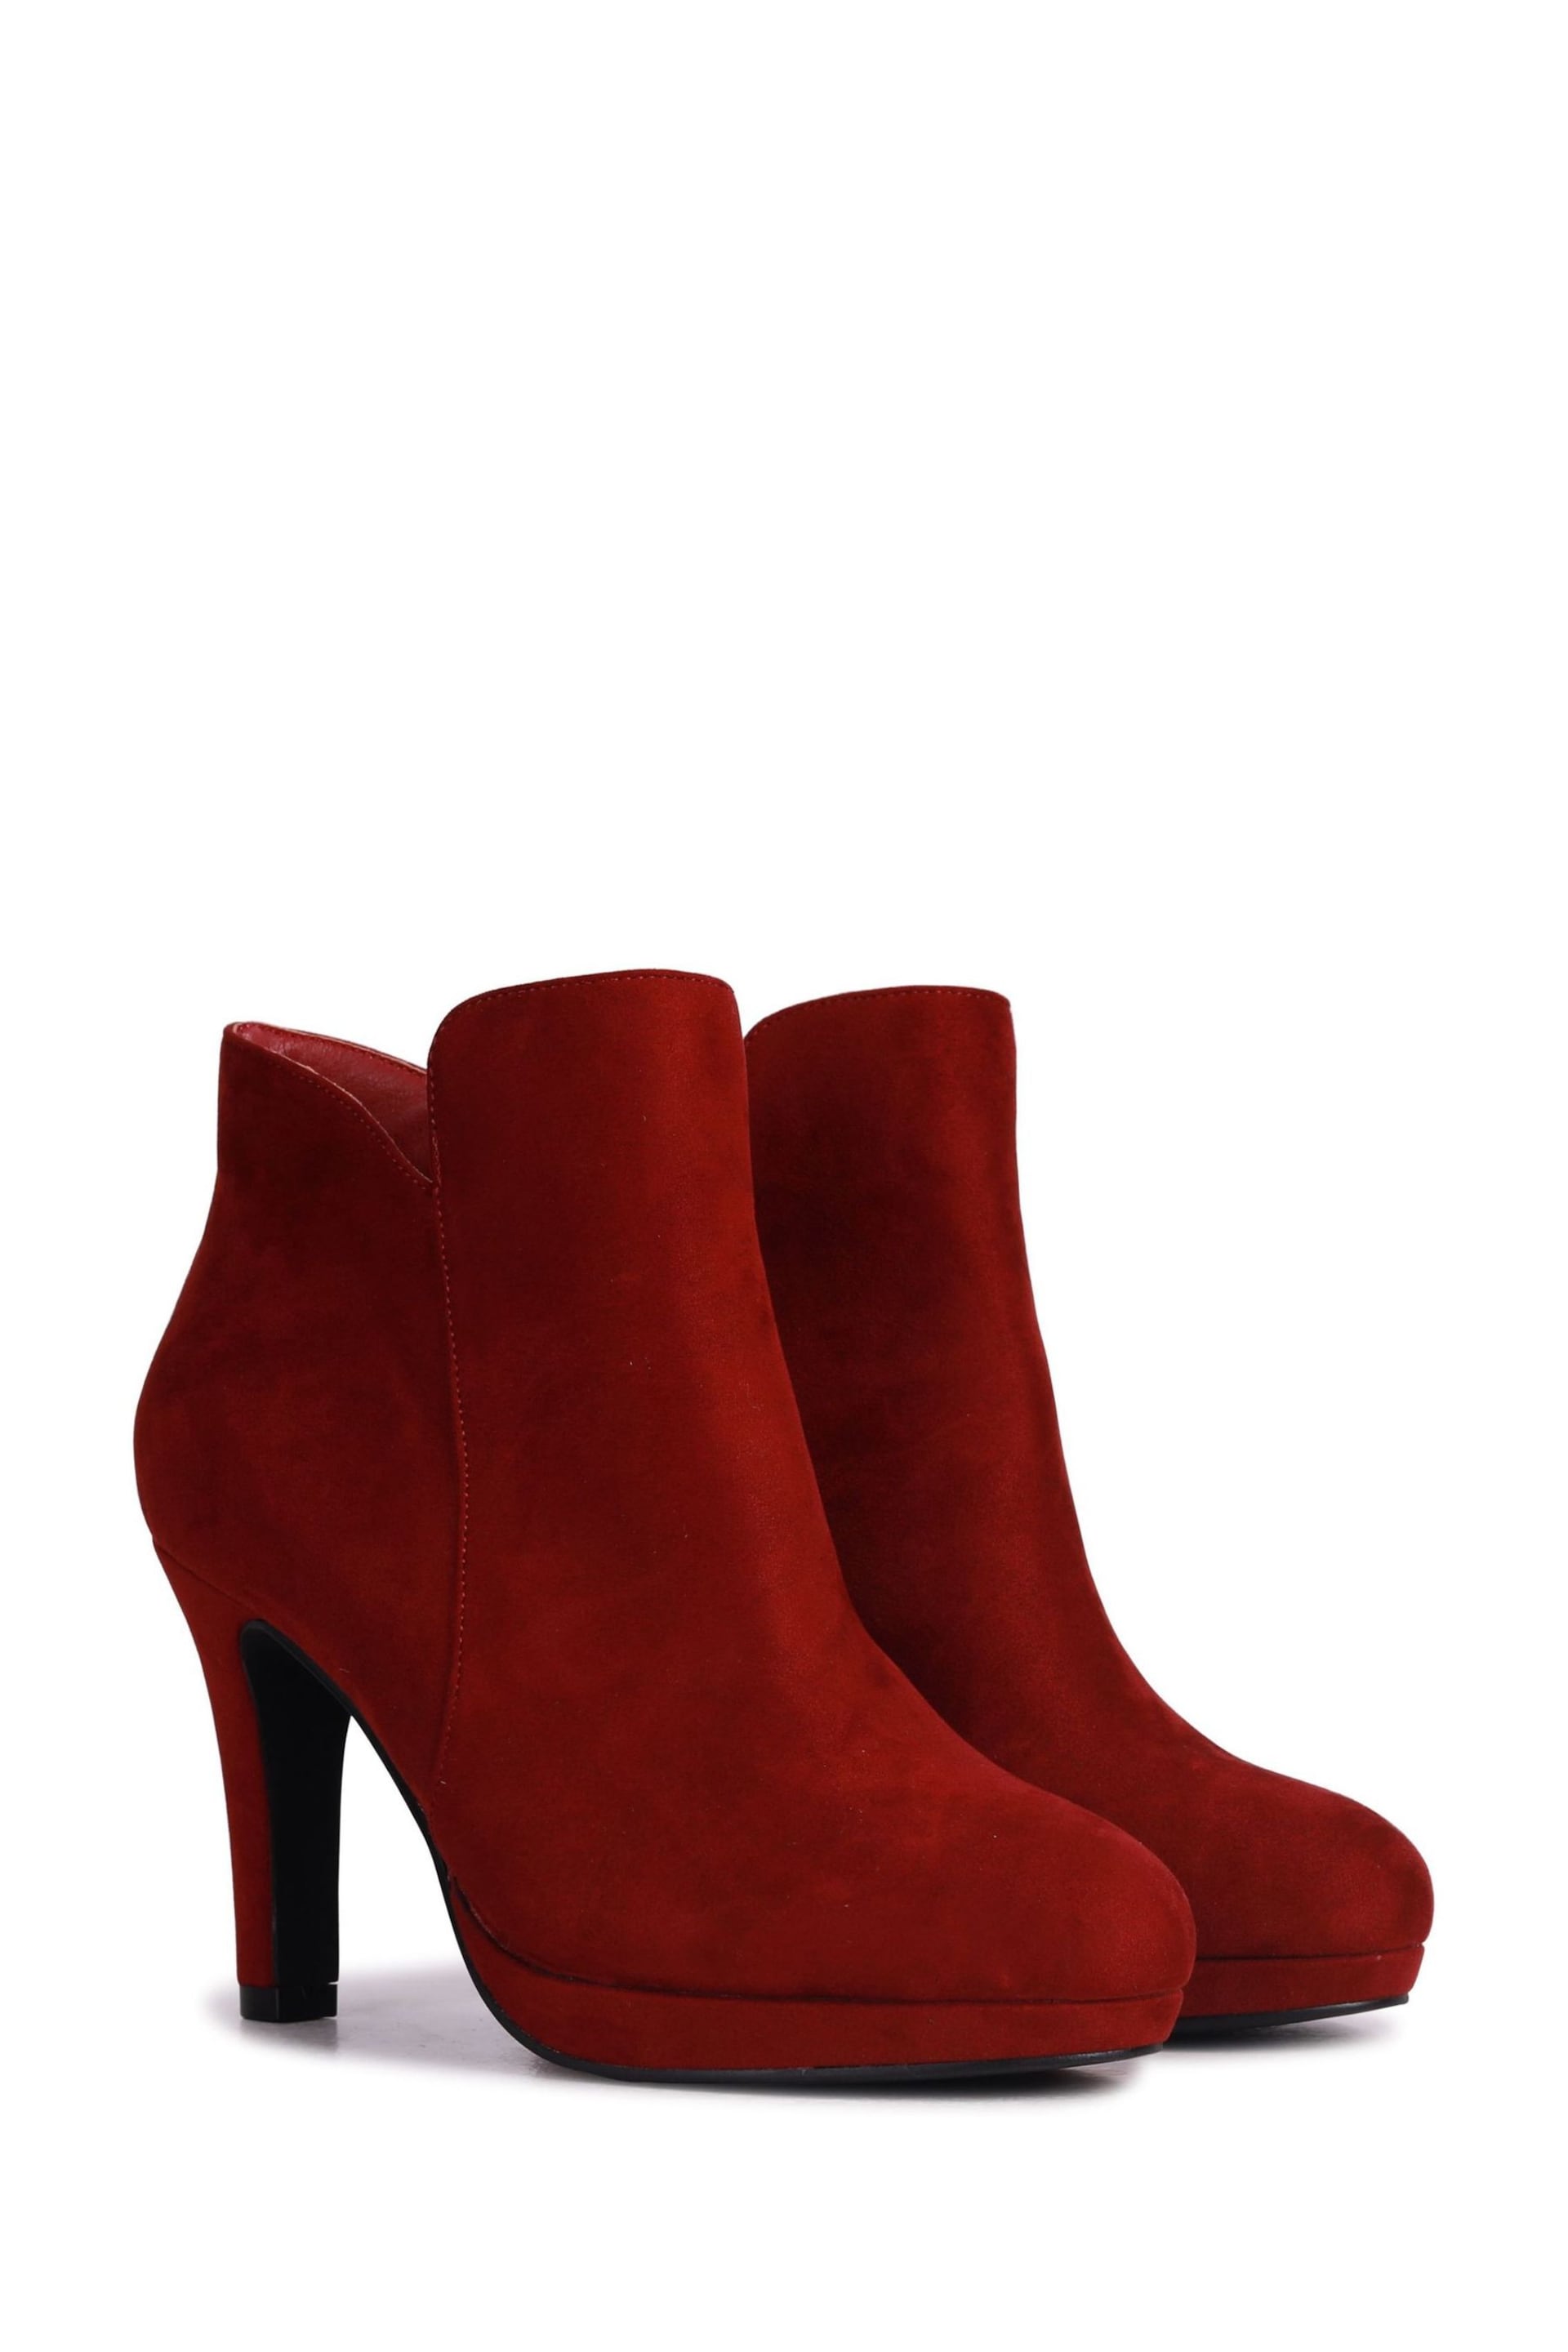 Linzi Red Layara Platform Ankle Boots With Stiletto Heels - Image 3 of 4